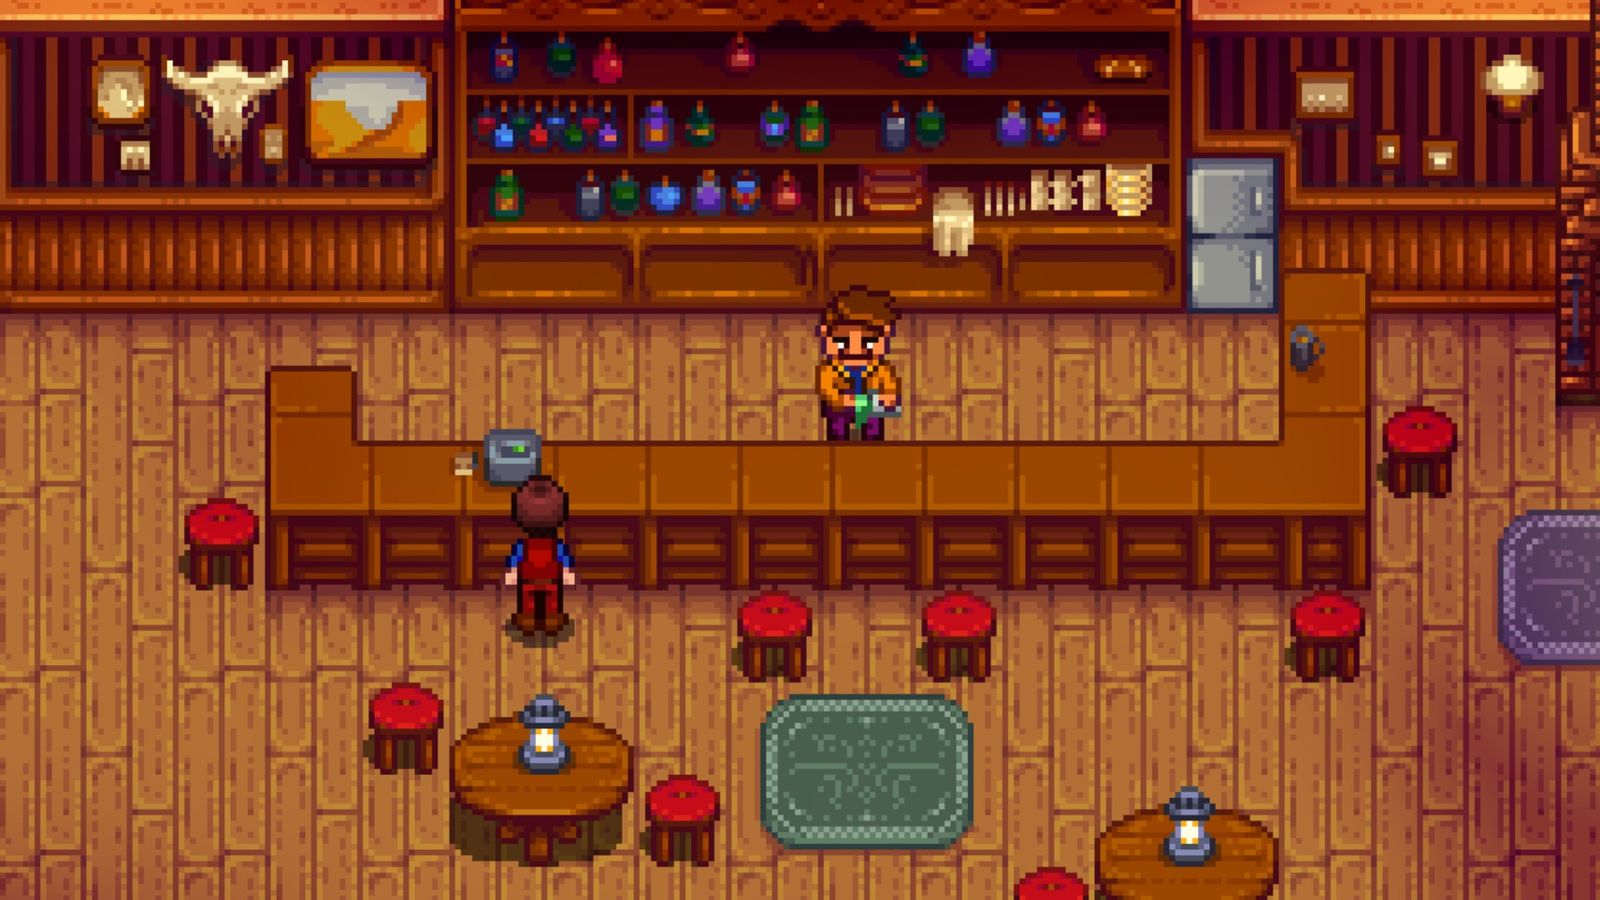 Stardew Valley, Stardrop Saloon. The player is stood at the till on the long wooden bar. The bartender, Gus, is stood behind the bar cleaning a glass.